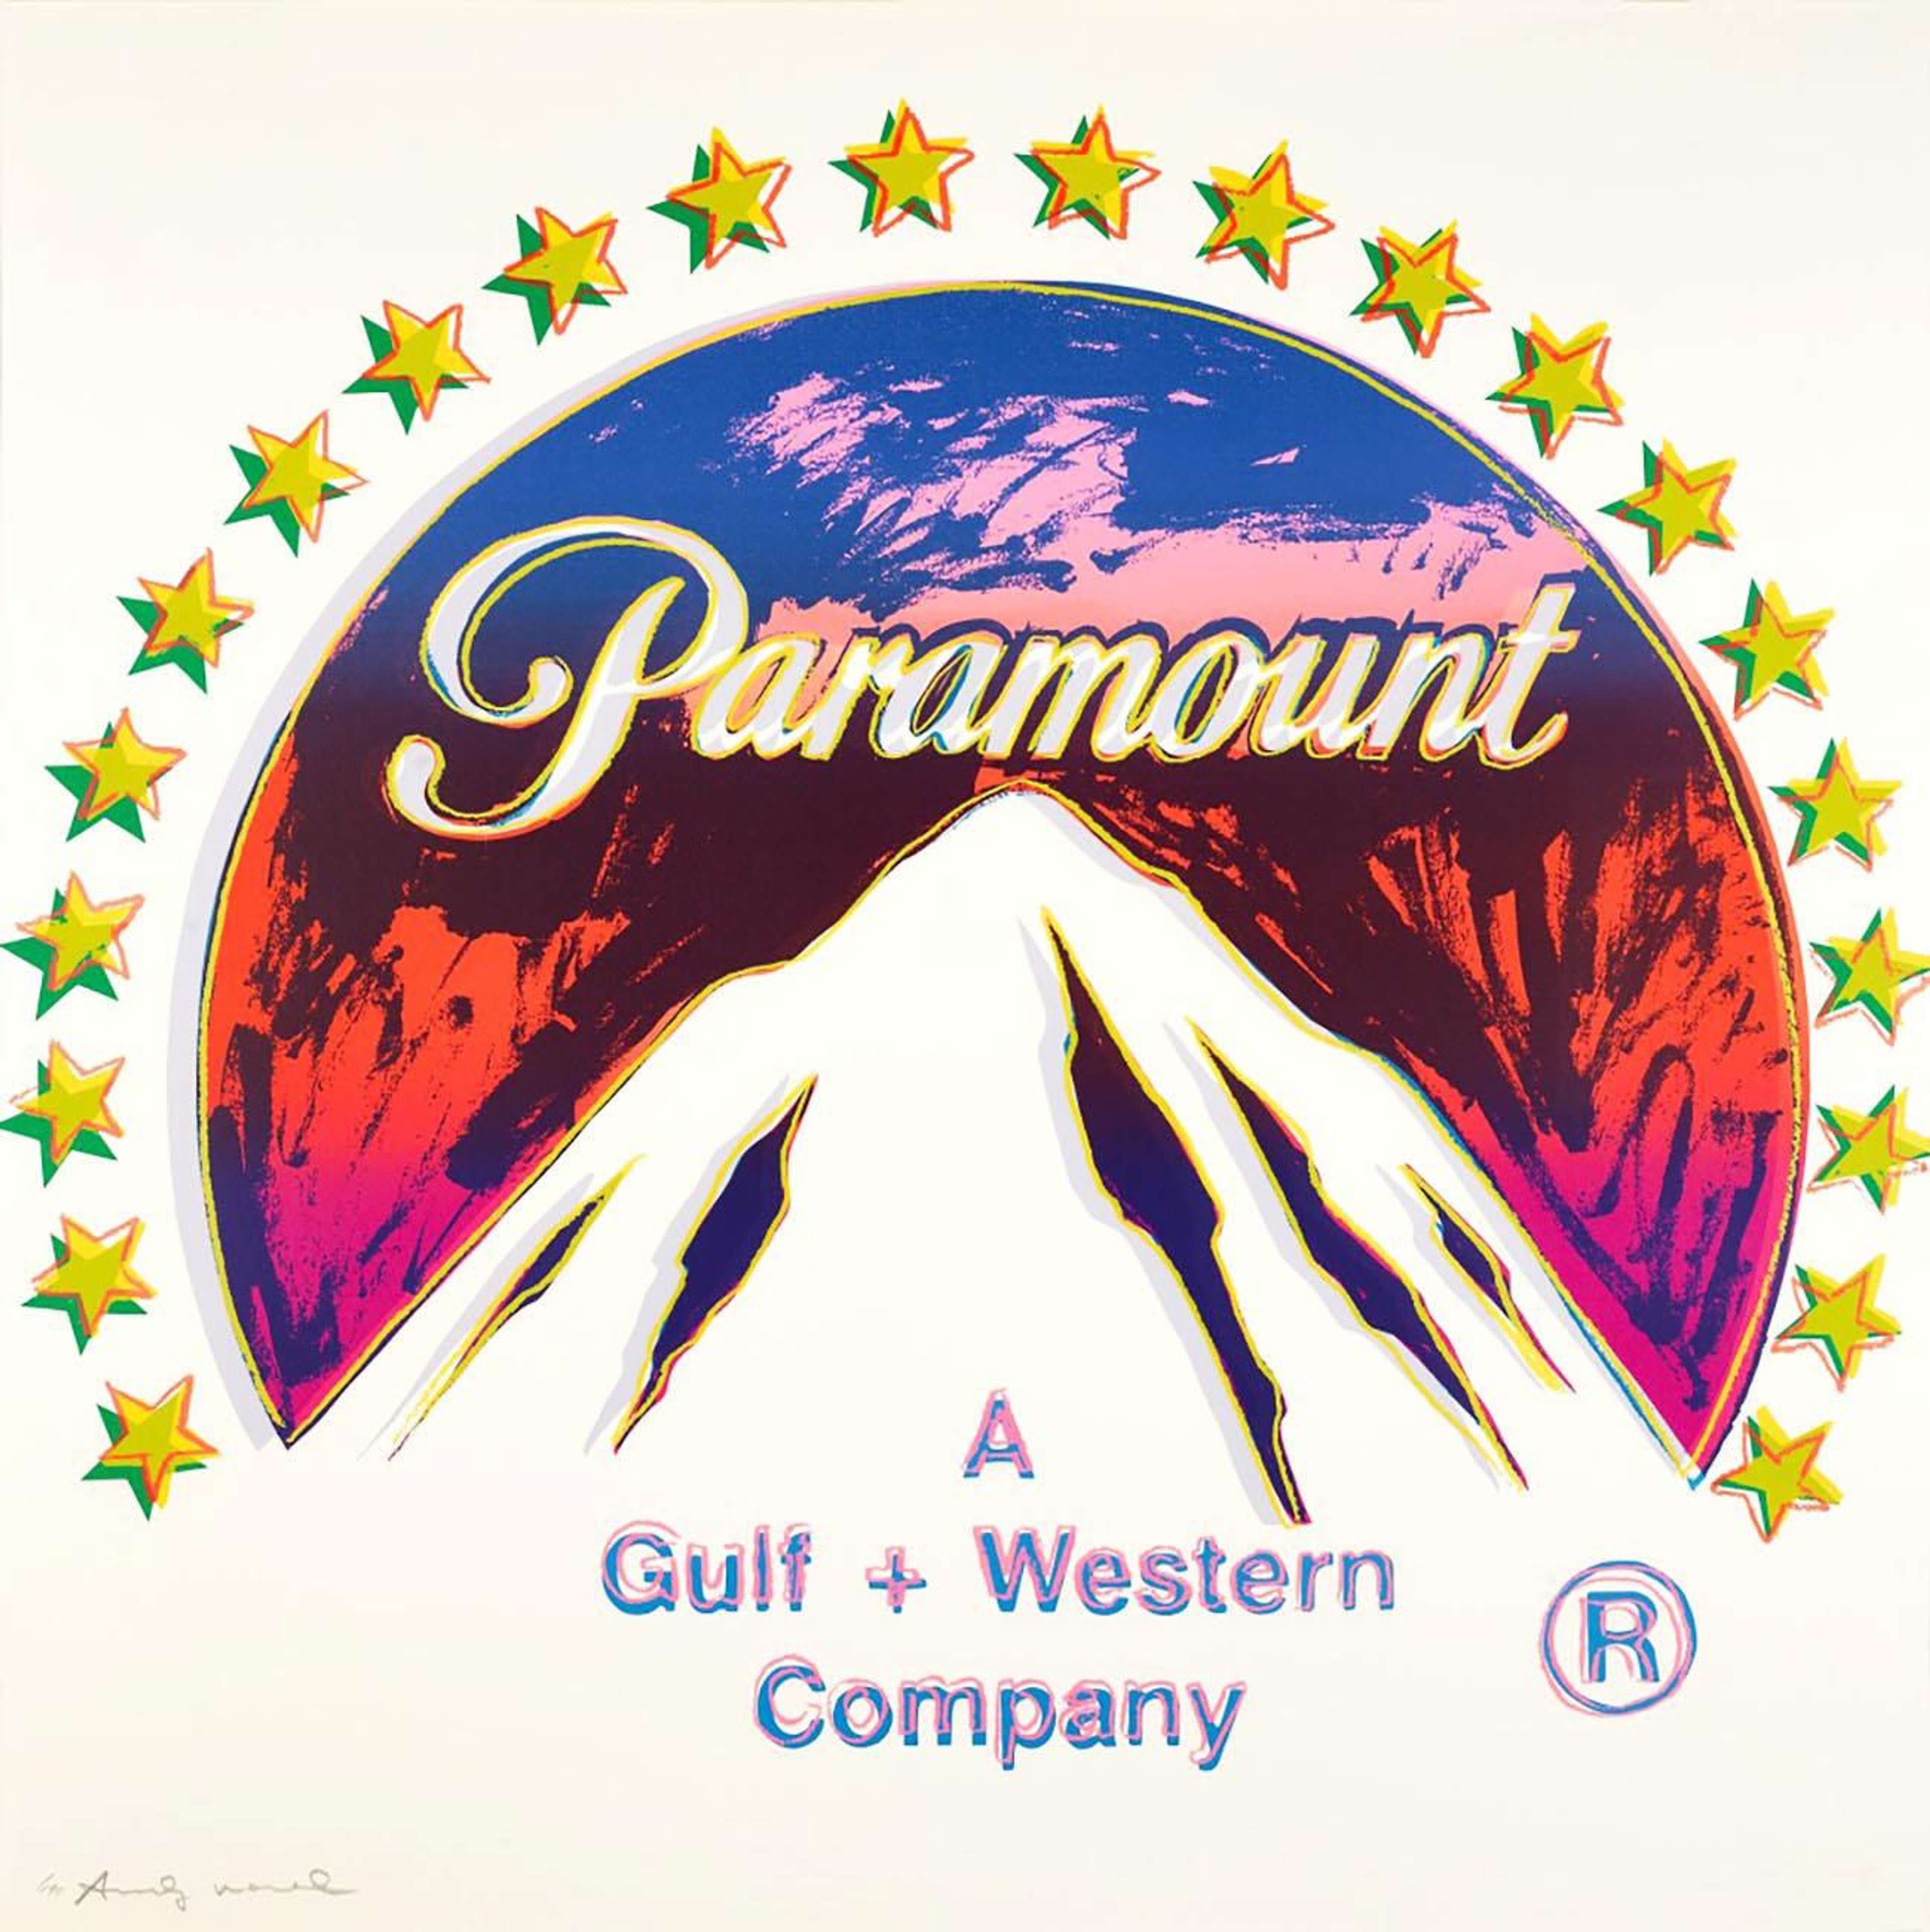 Paramount is a colourful screen print by Andy Warhol that captures the well-known logo of the American film studio, Paramount Pictures. Warhol depicts the logo’s iconic mountaintop, rendered in white against a tricoloured backdrop of pink, red and blue. The circular logo in the middle of the print is surrounded by an arch of stars in yellow and green. These vivid and unlikely colours contrast with the print’s white background.